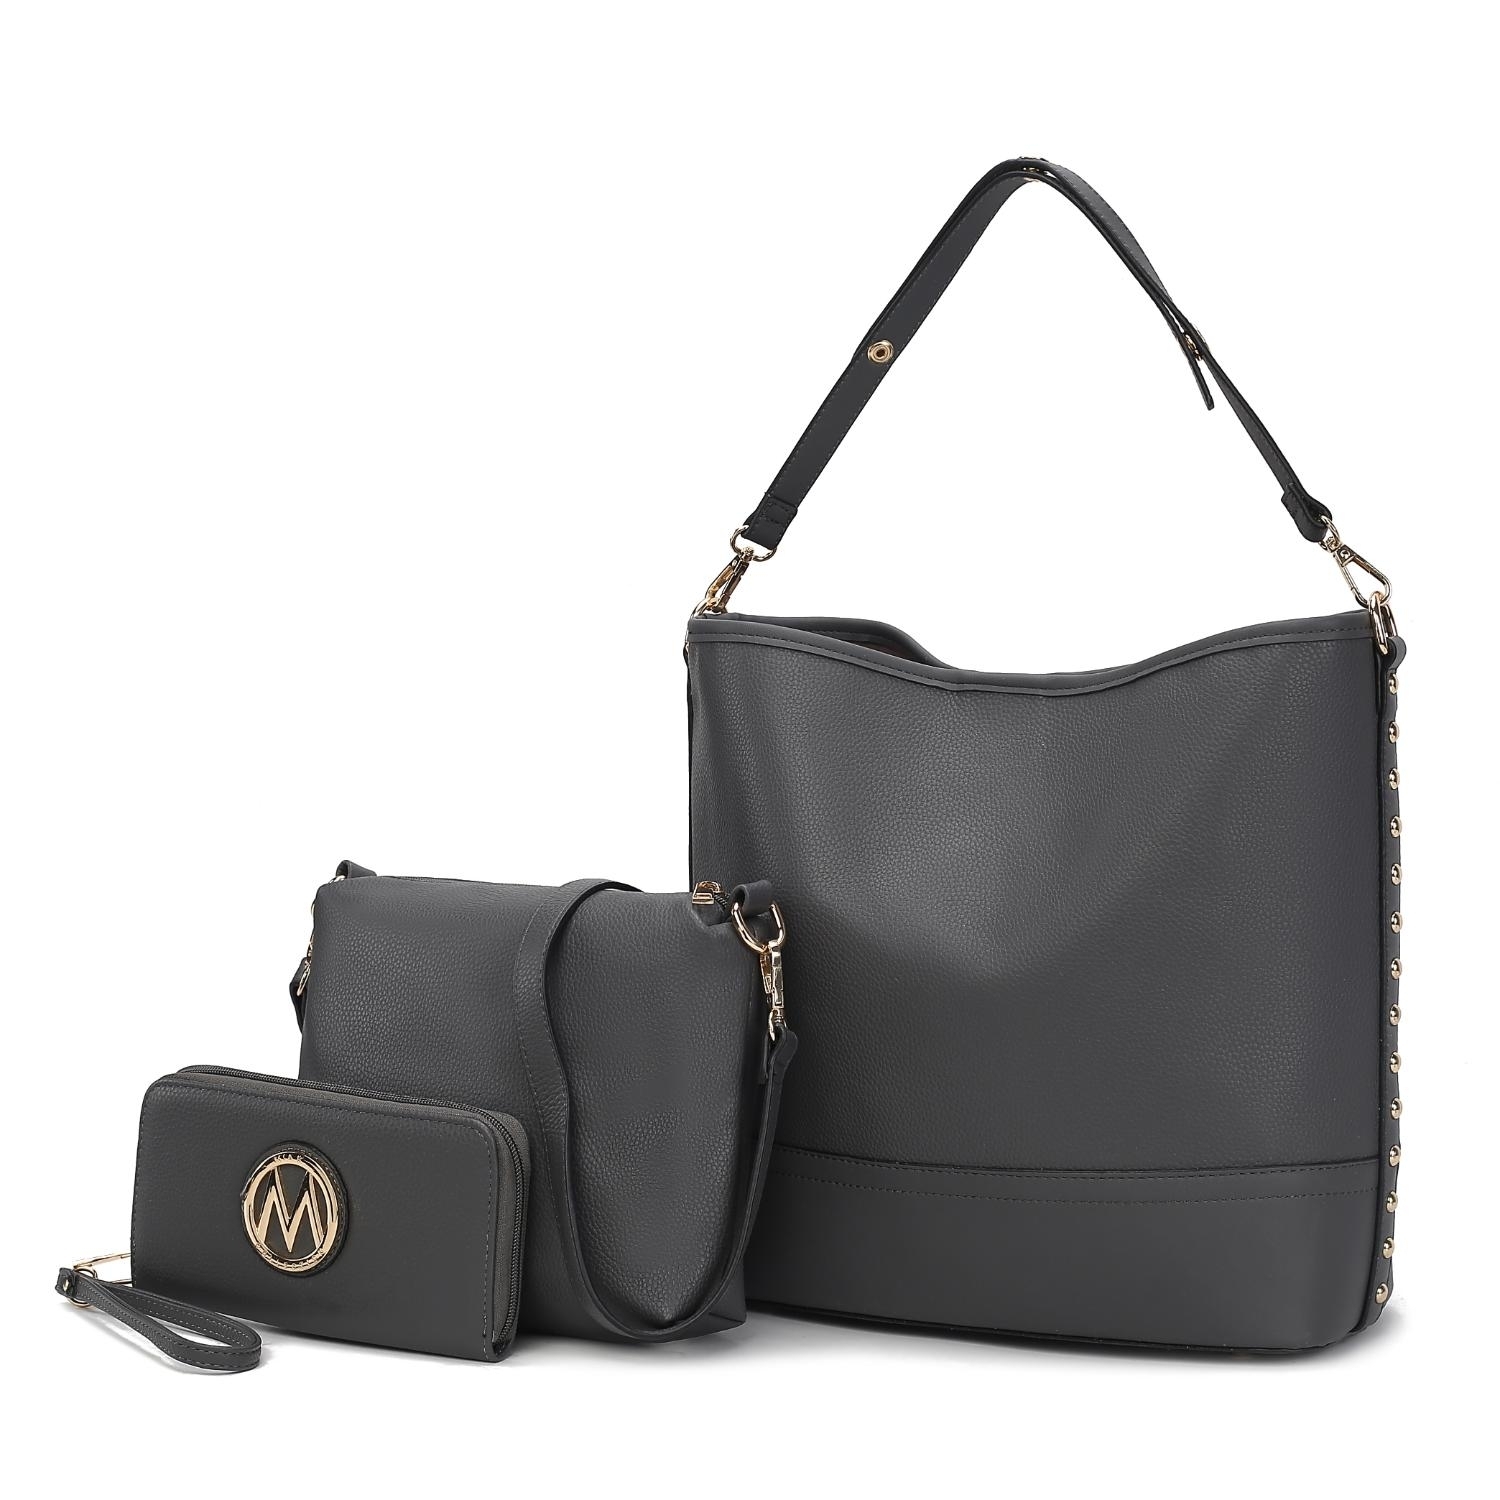 MKF Collection Ultimate Hobo Handbag Pouch & Wallet By Mia K. - Charcoal